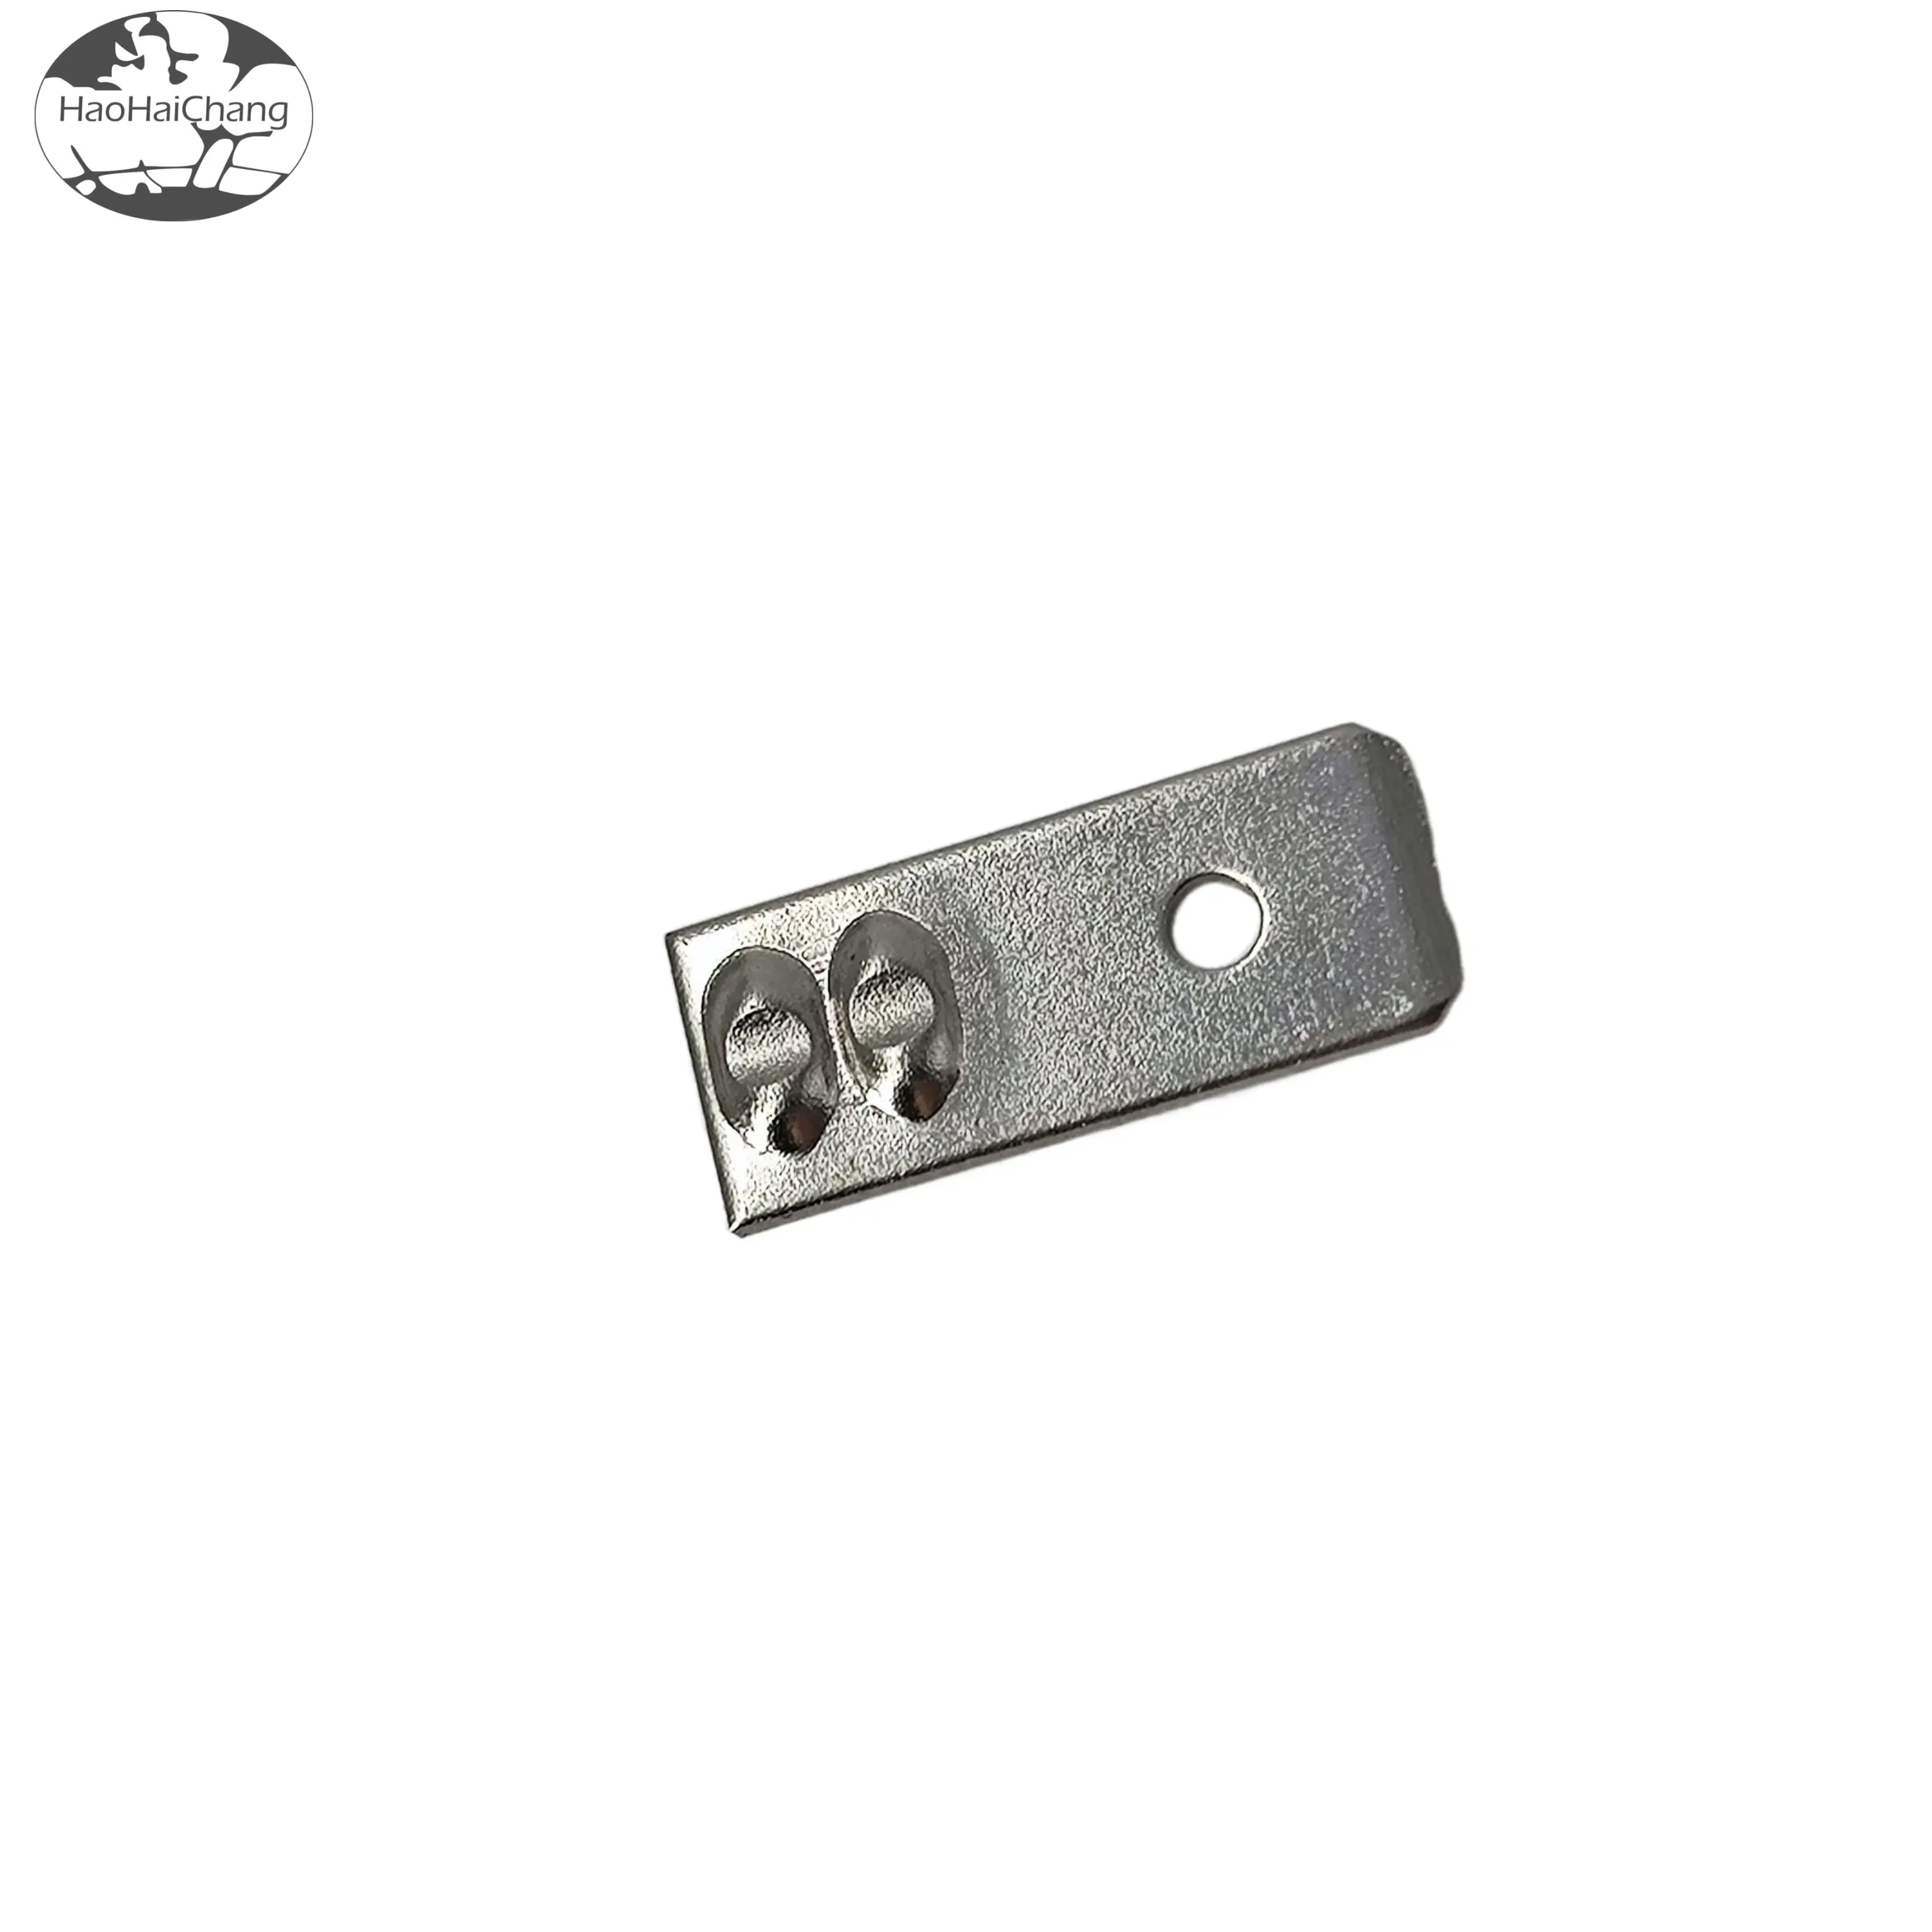 HHC-0139 Connector